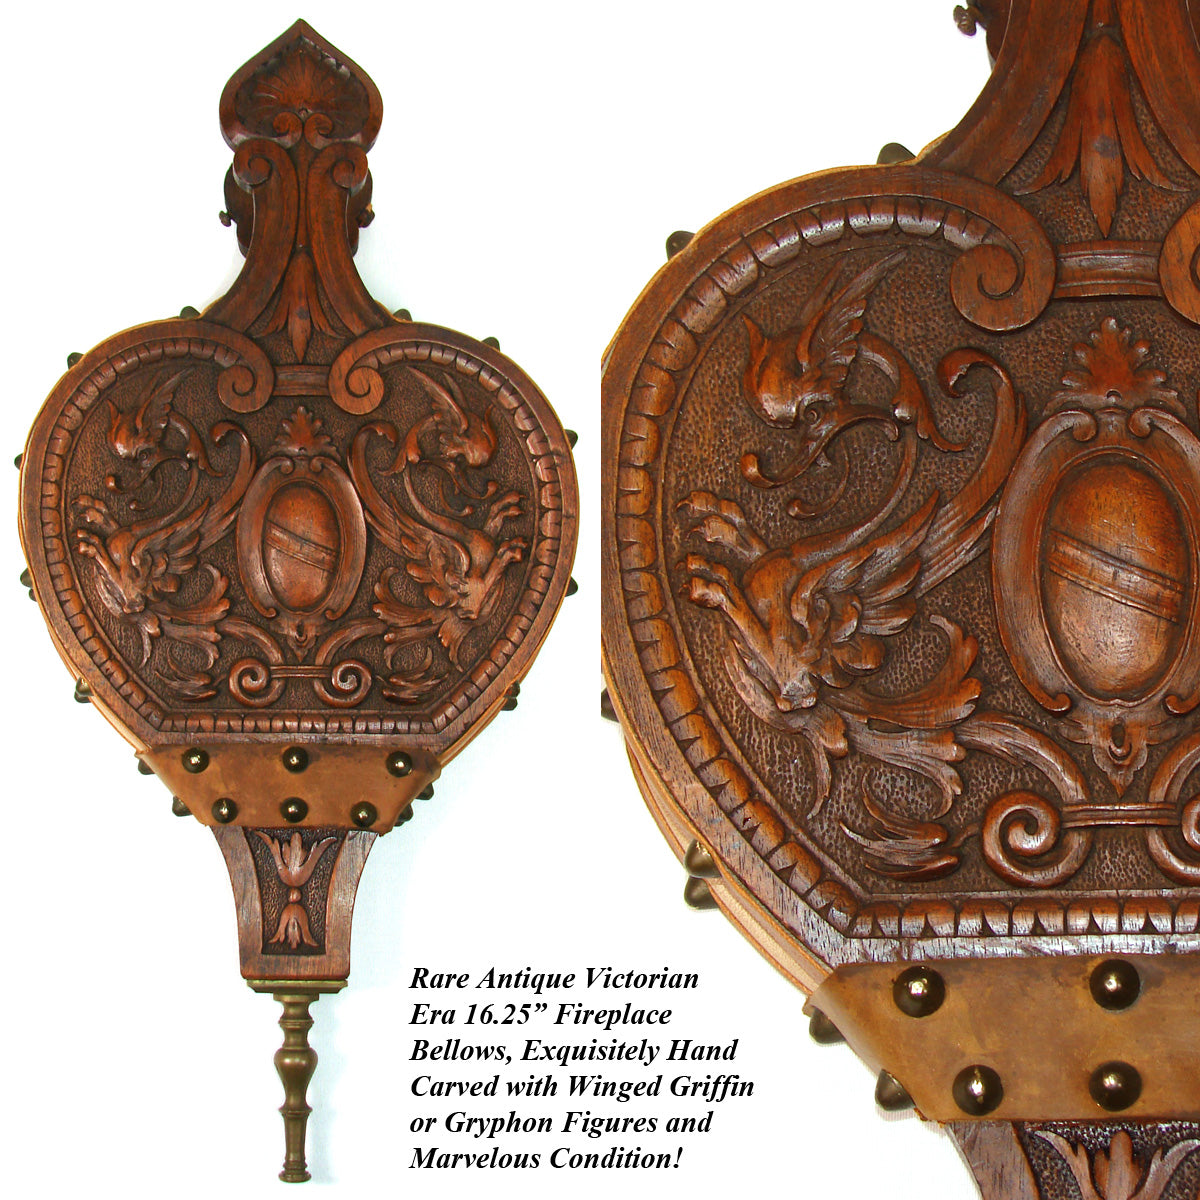 Rare Antique Victorian Era Carved 16.25" Fireplace Bellows, Highly Ornate with Winged Griffin Figures